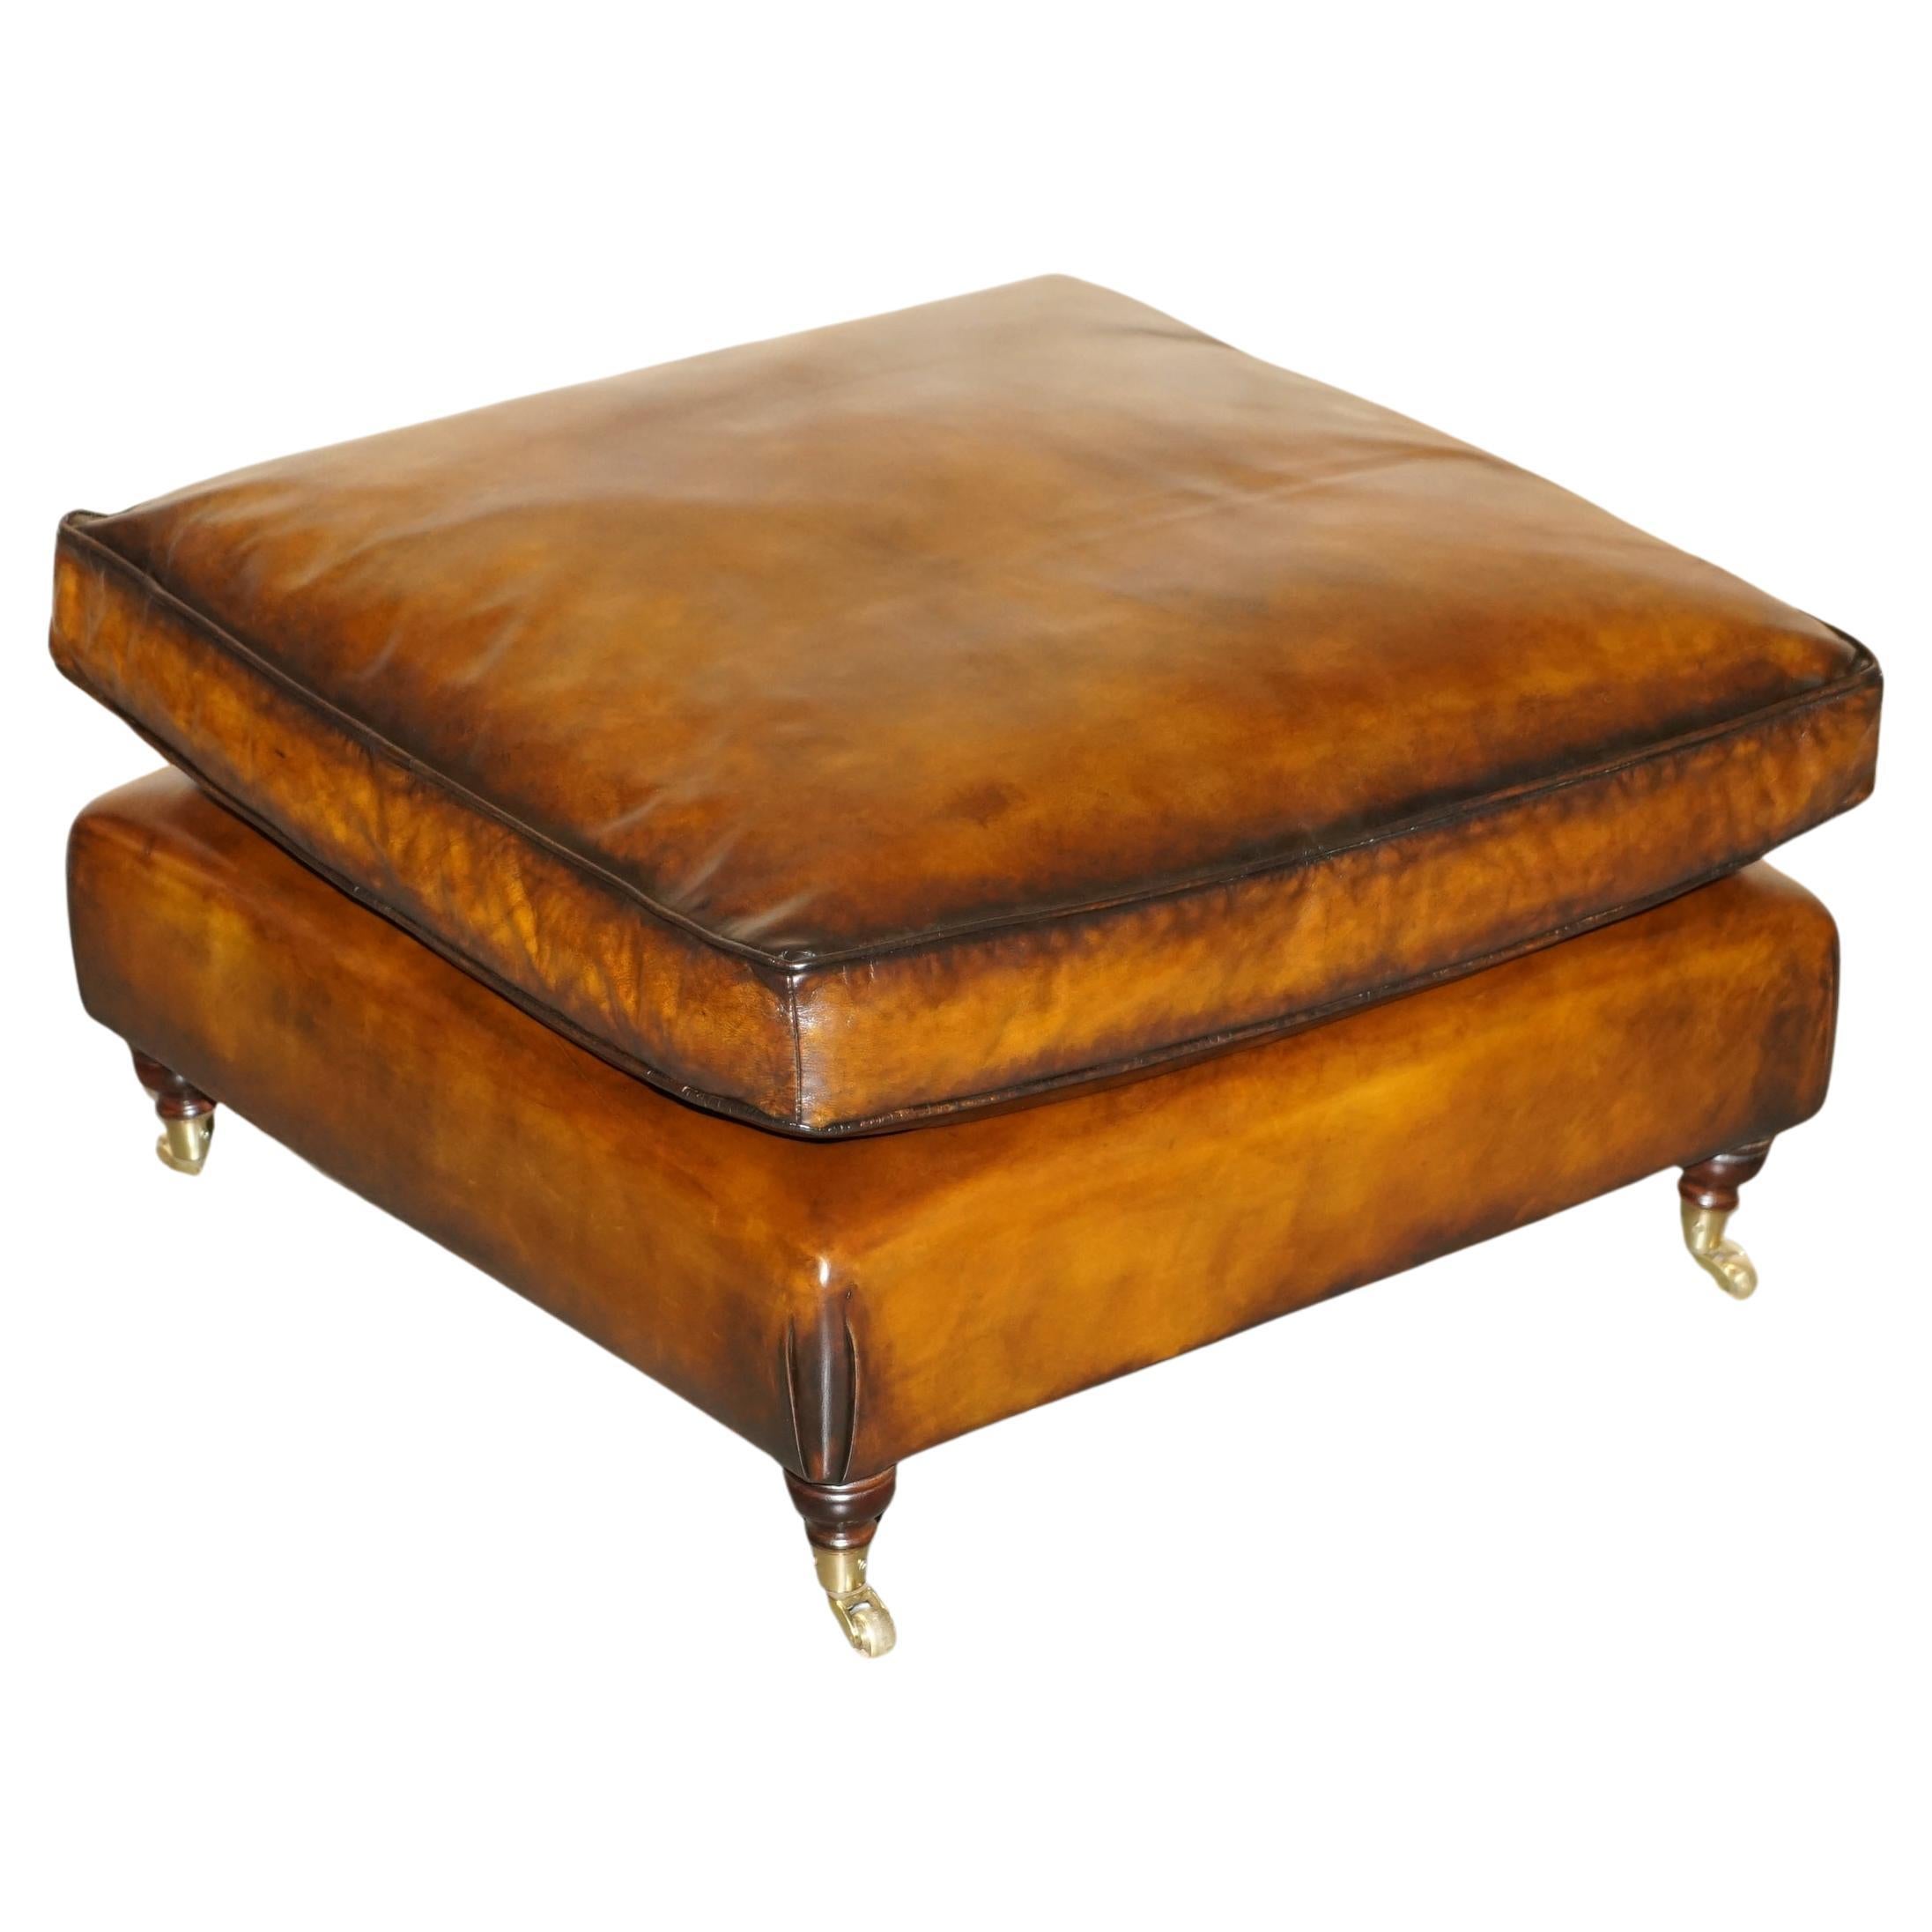 EXTRA LARGE FEATHER SEATHER SEAT RESTORED BROWN LEATHER OTTOMAN FOOTSTOOL PART OF SUiTE im Angebot